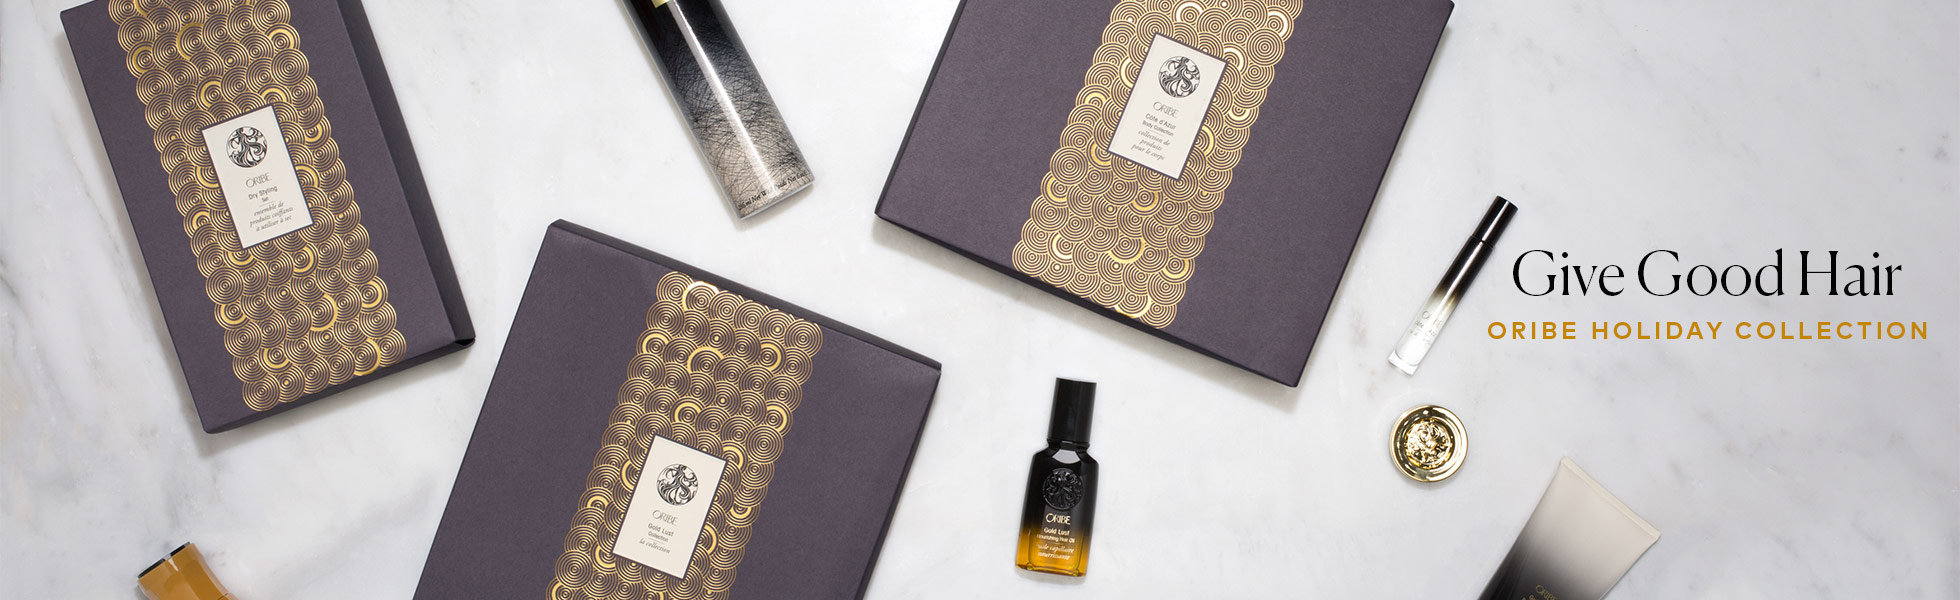 Give Good Hair – Oribe Holiday Collection